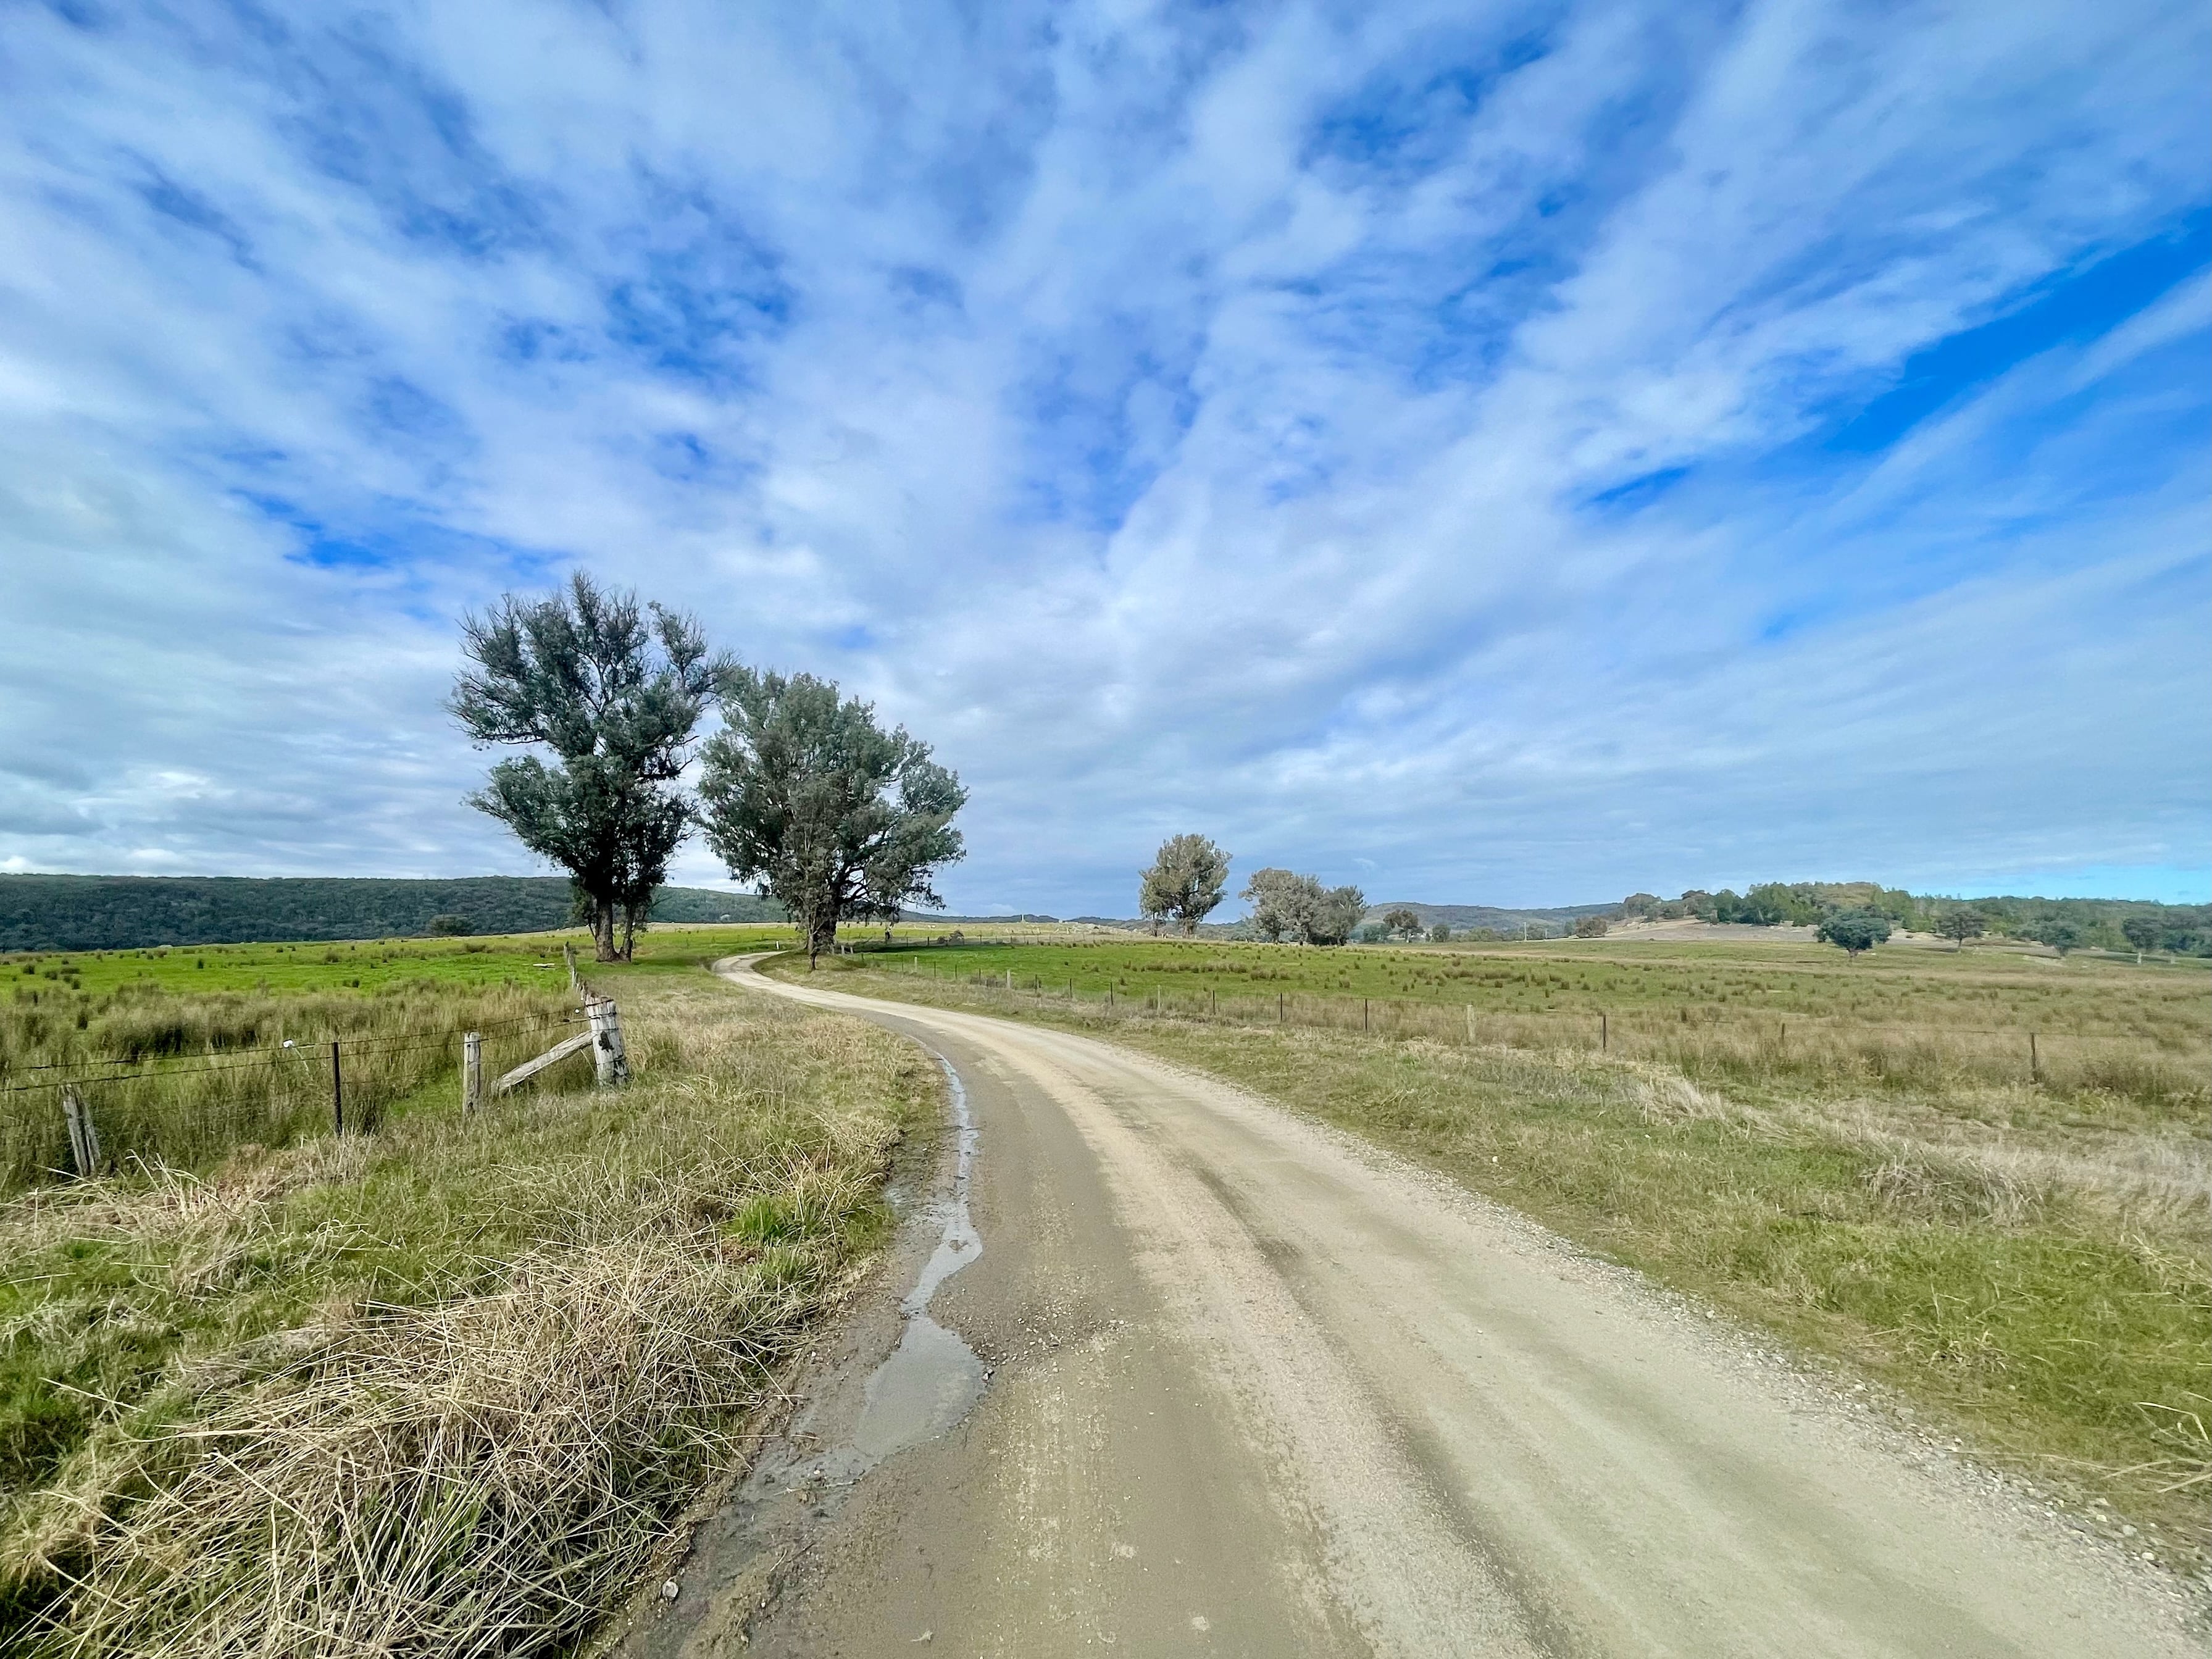 A smooth gravel road winding between two native trees  and gently rising into tyhe distance surrounded by open farmland and native bushland covered hills in the distance under partially cloudy skies